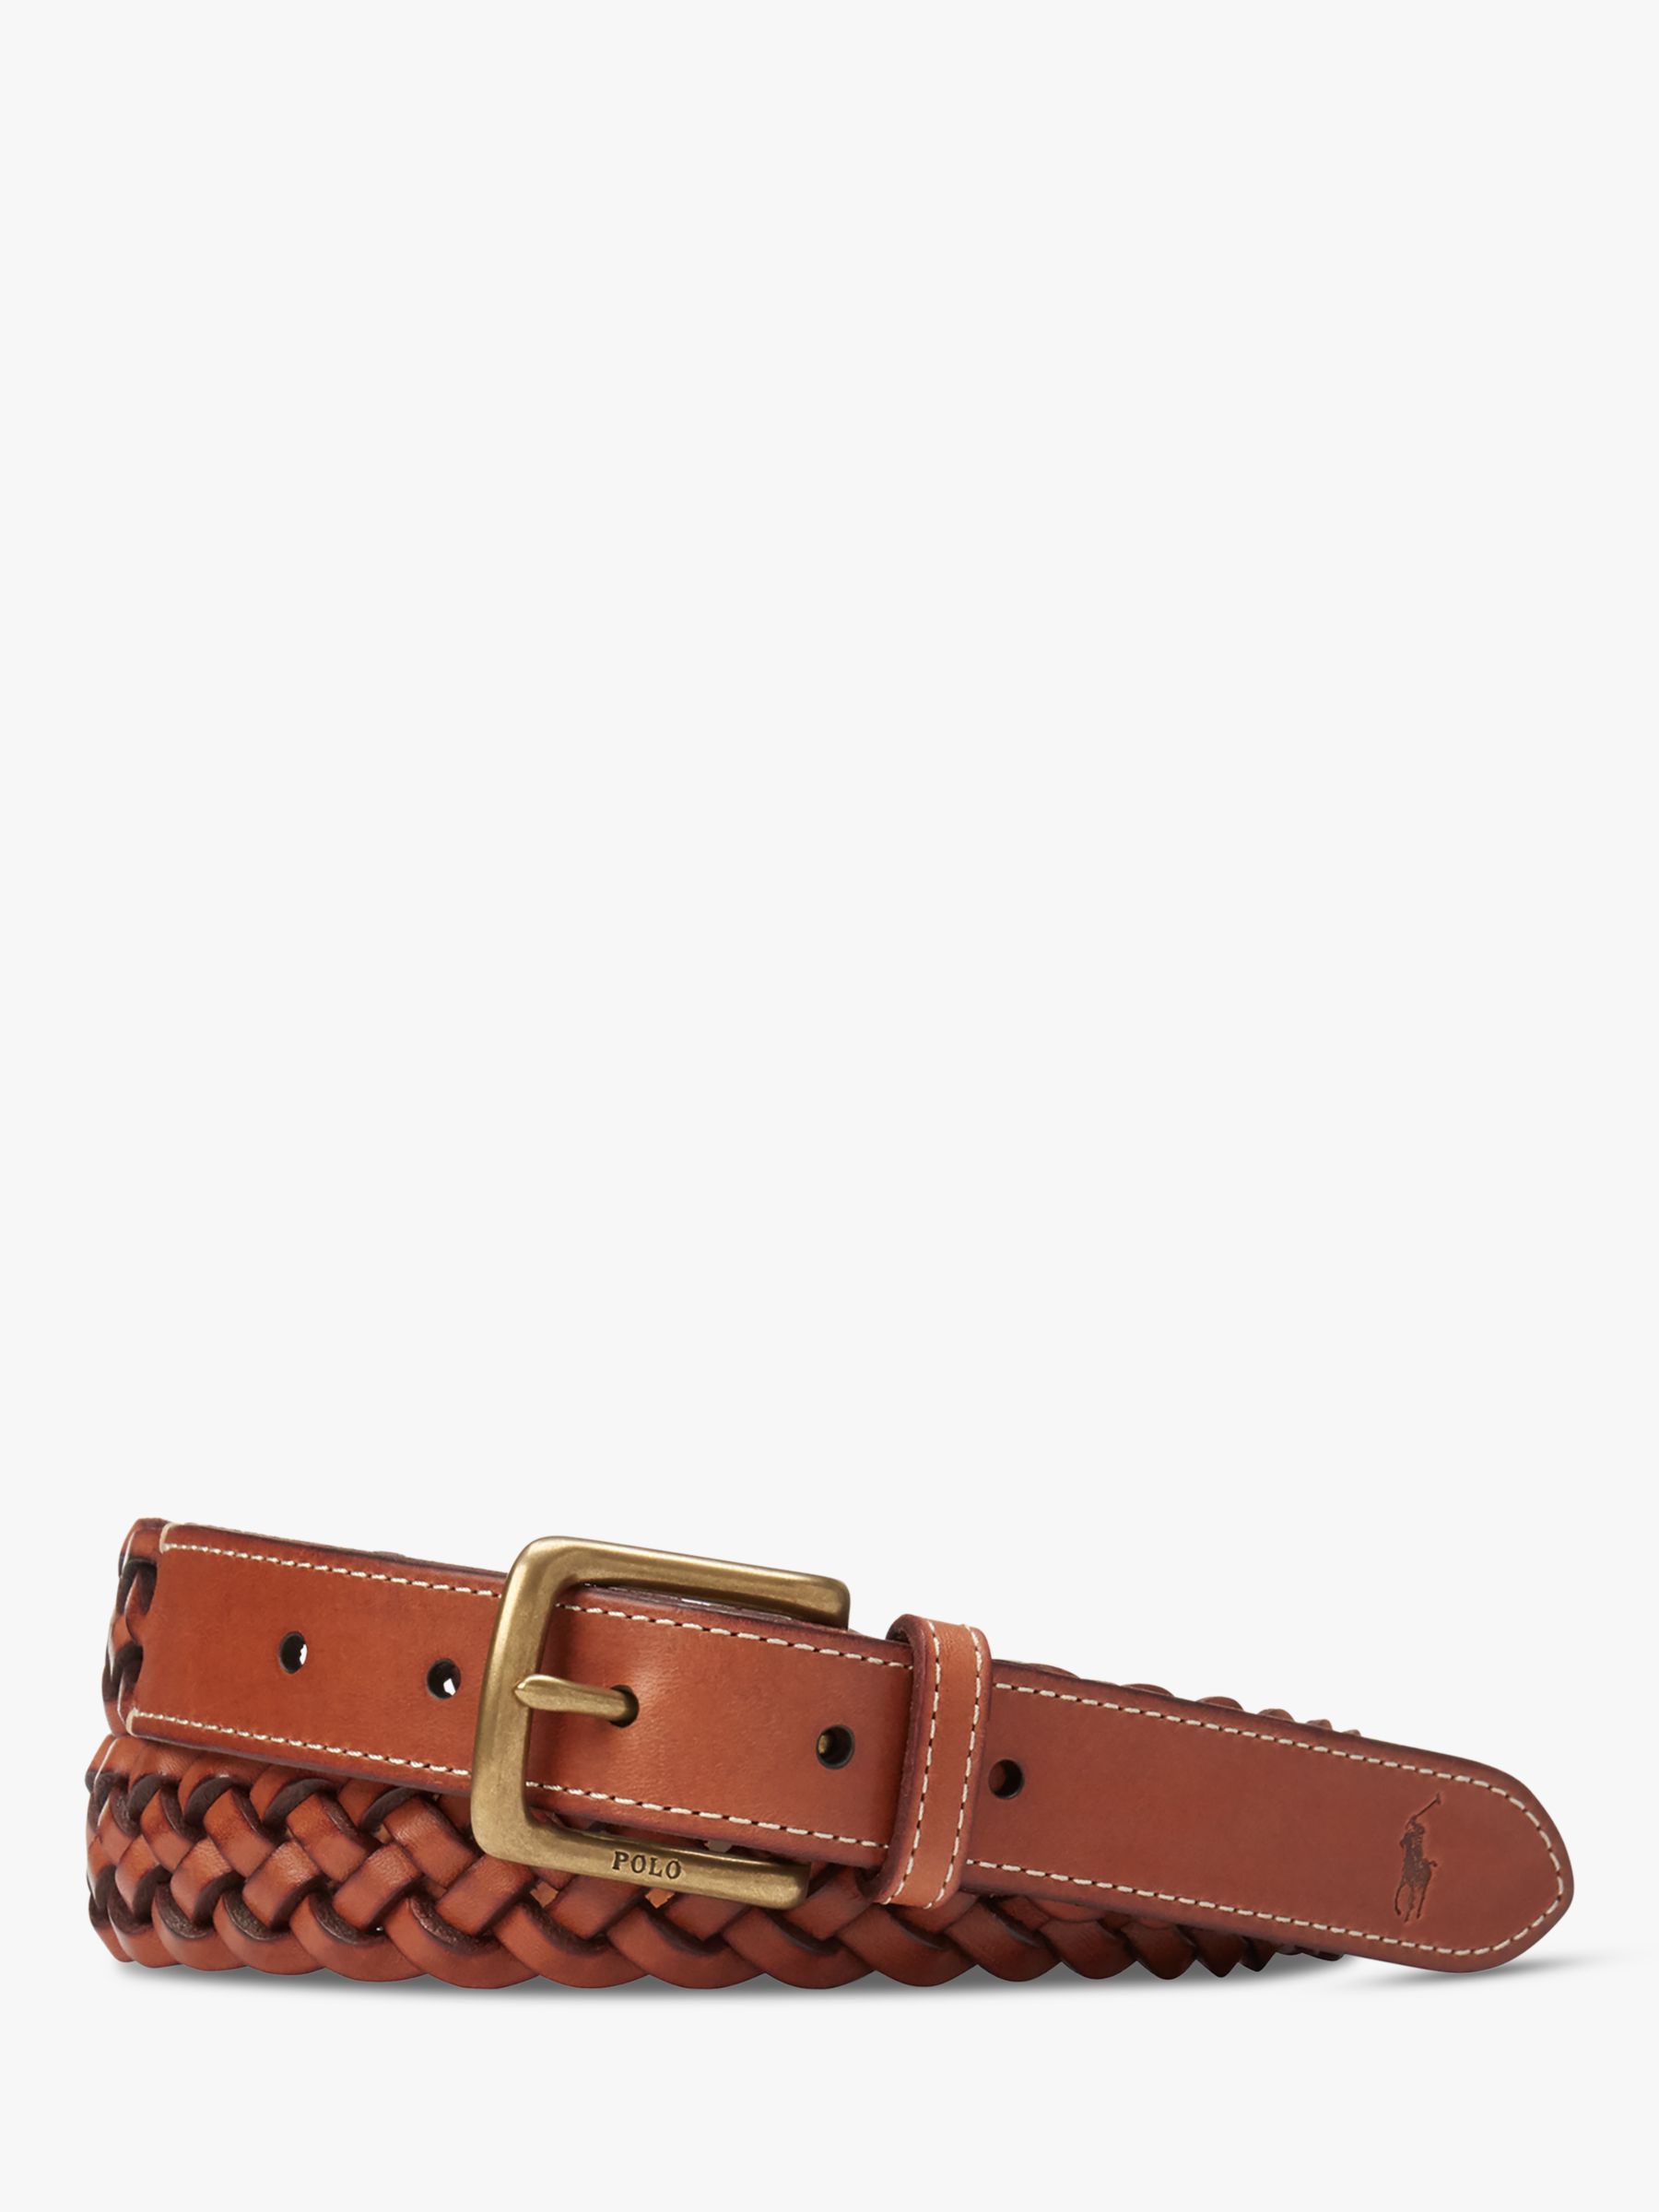 Polo Ralph Lauren Braided Leather Belt, Brown at John Lewis & Partners